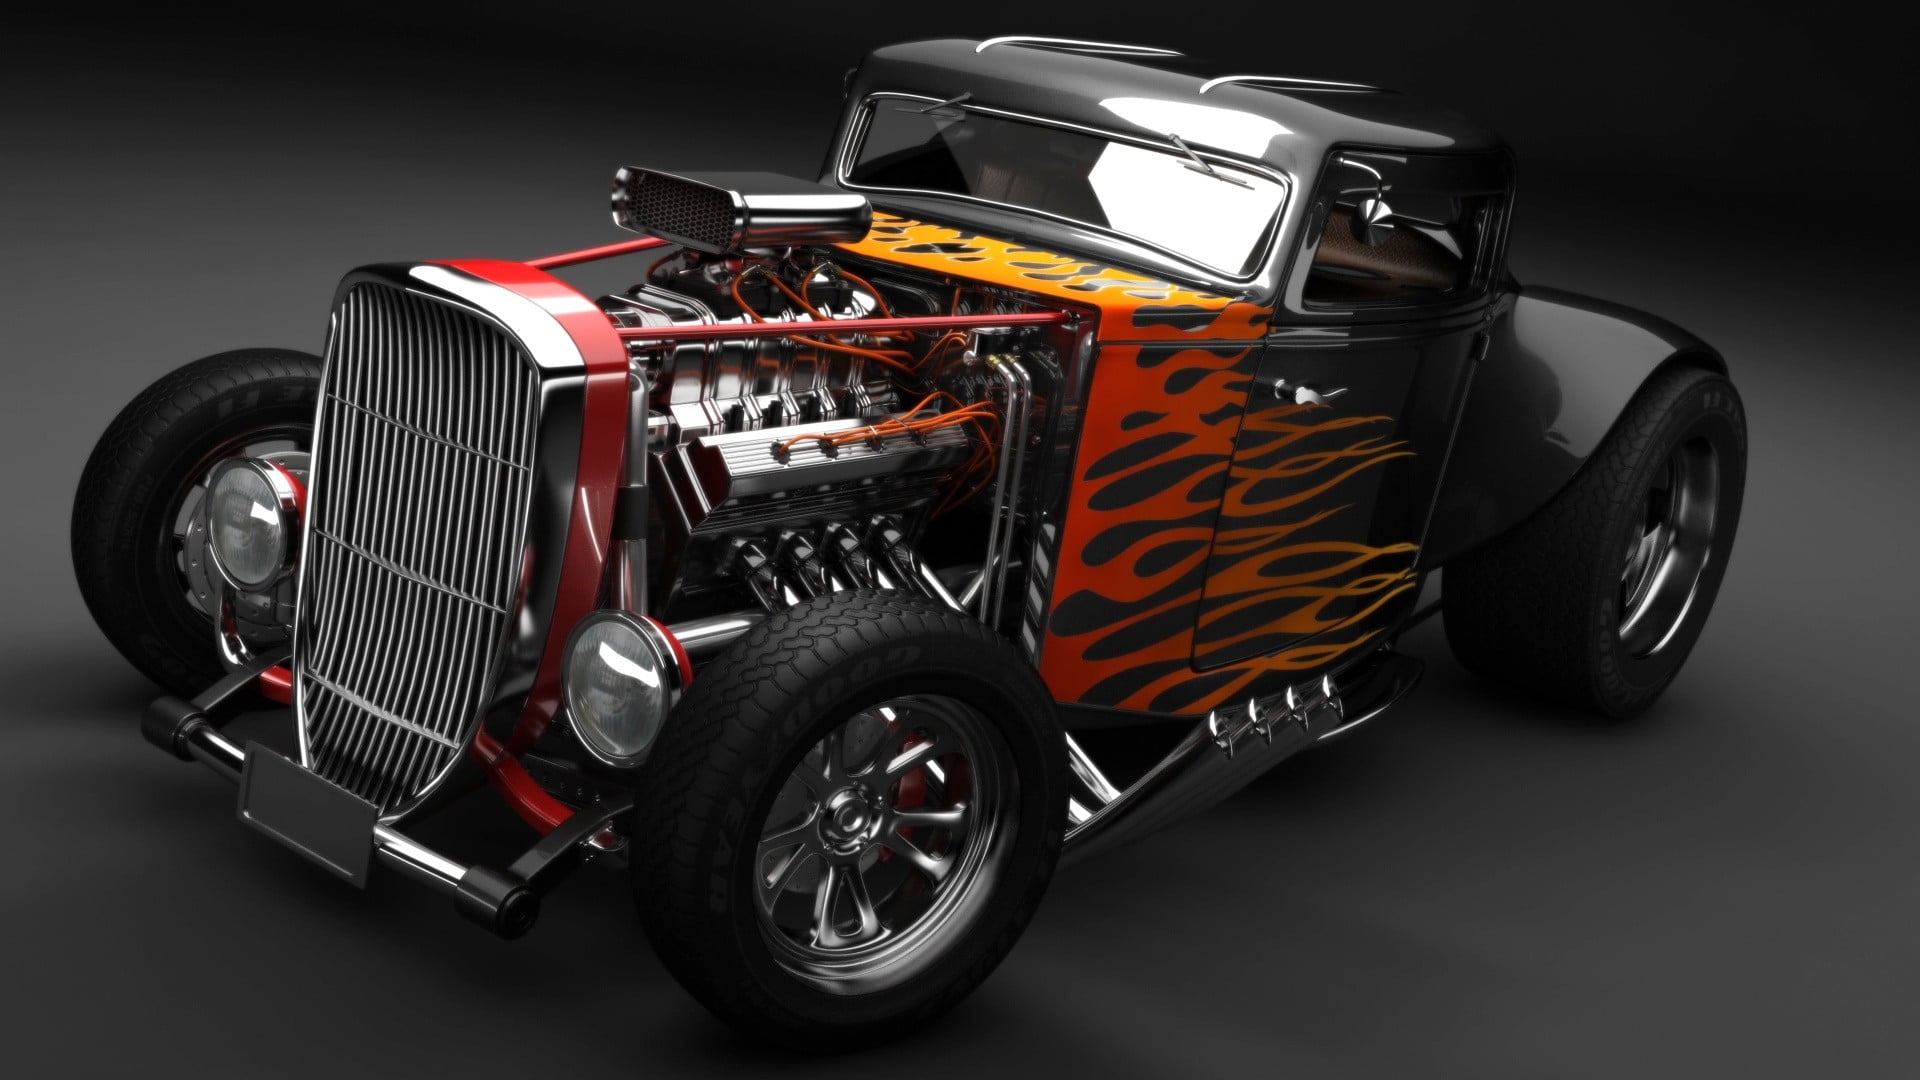 1242x2208 Resolution Red And Black Hot Rod Scale Model Car Hot Rod Modified Muscle Cars Hd